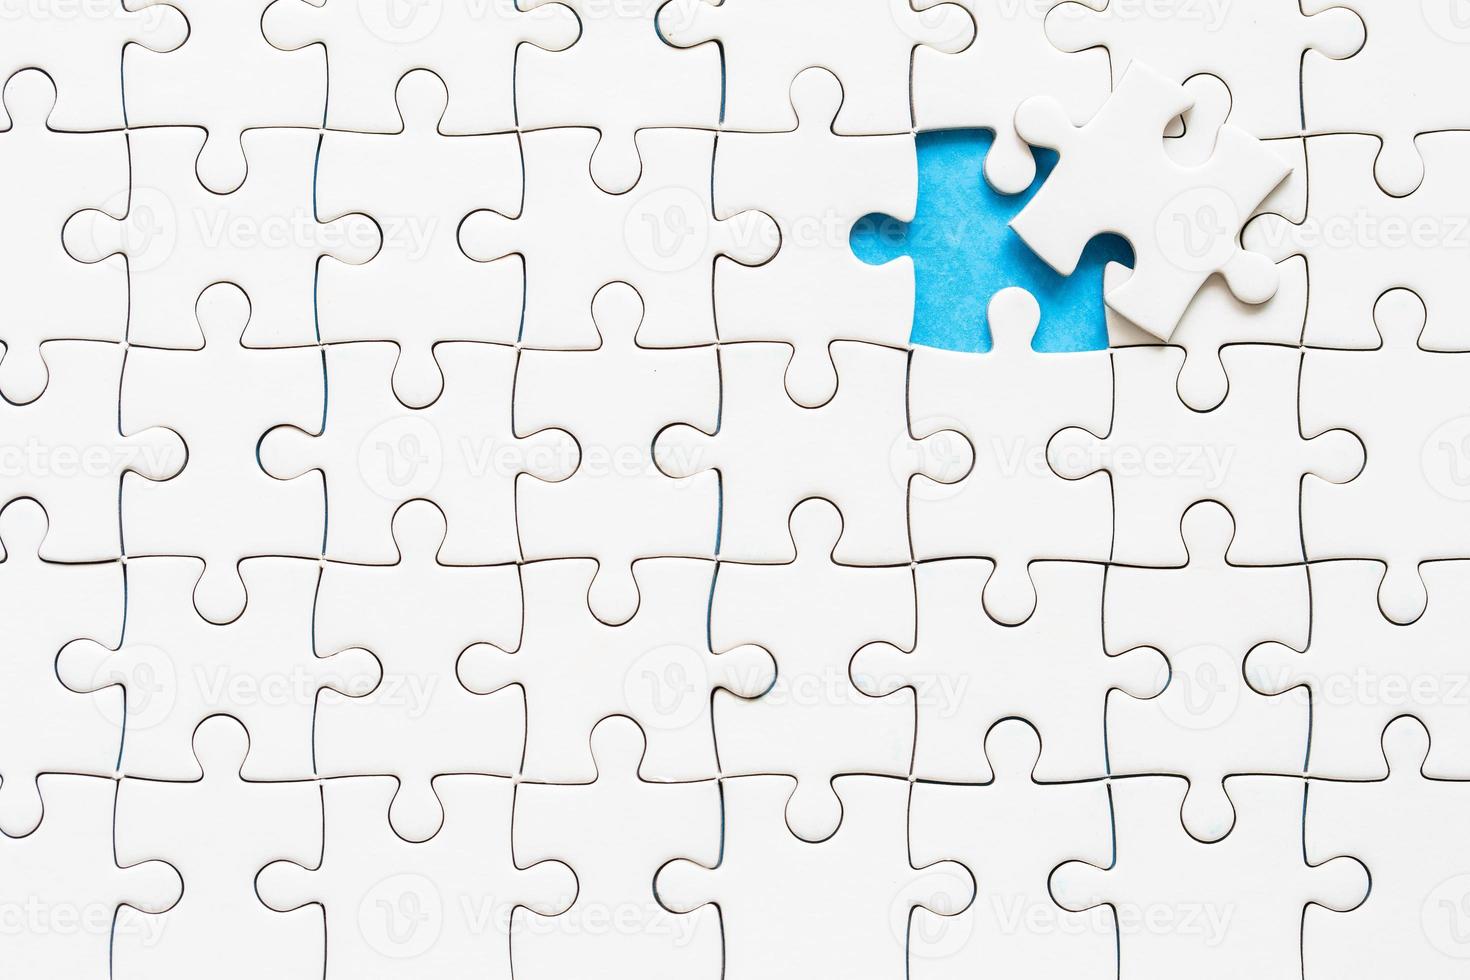 Survive take down Chemist White part of jigsaw puzzle pieces on blue background. concepts of problem  solving, business success, teamwork, Team playing jigsaw game incomplete,  Texture photo with copy space for text 10195975 Stock Photo at